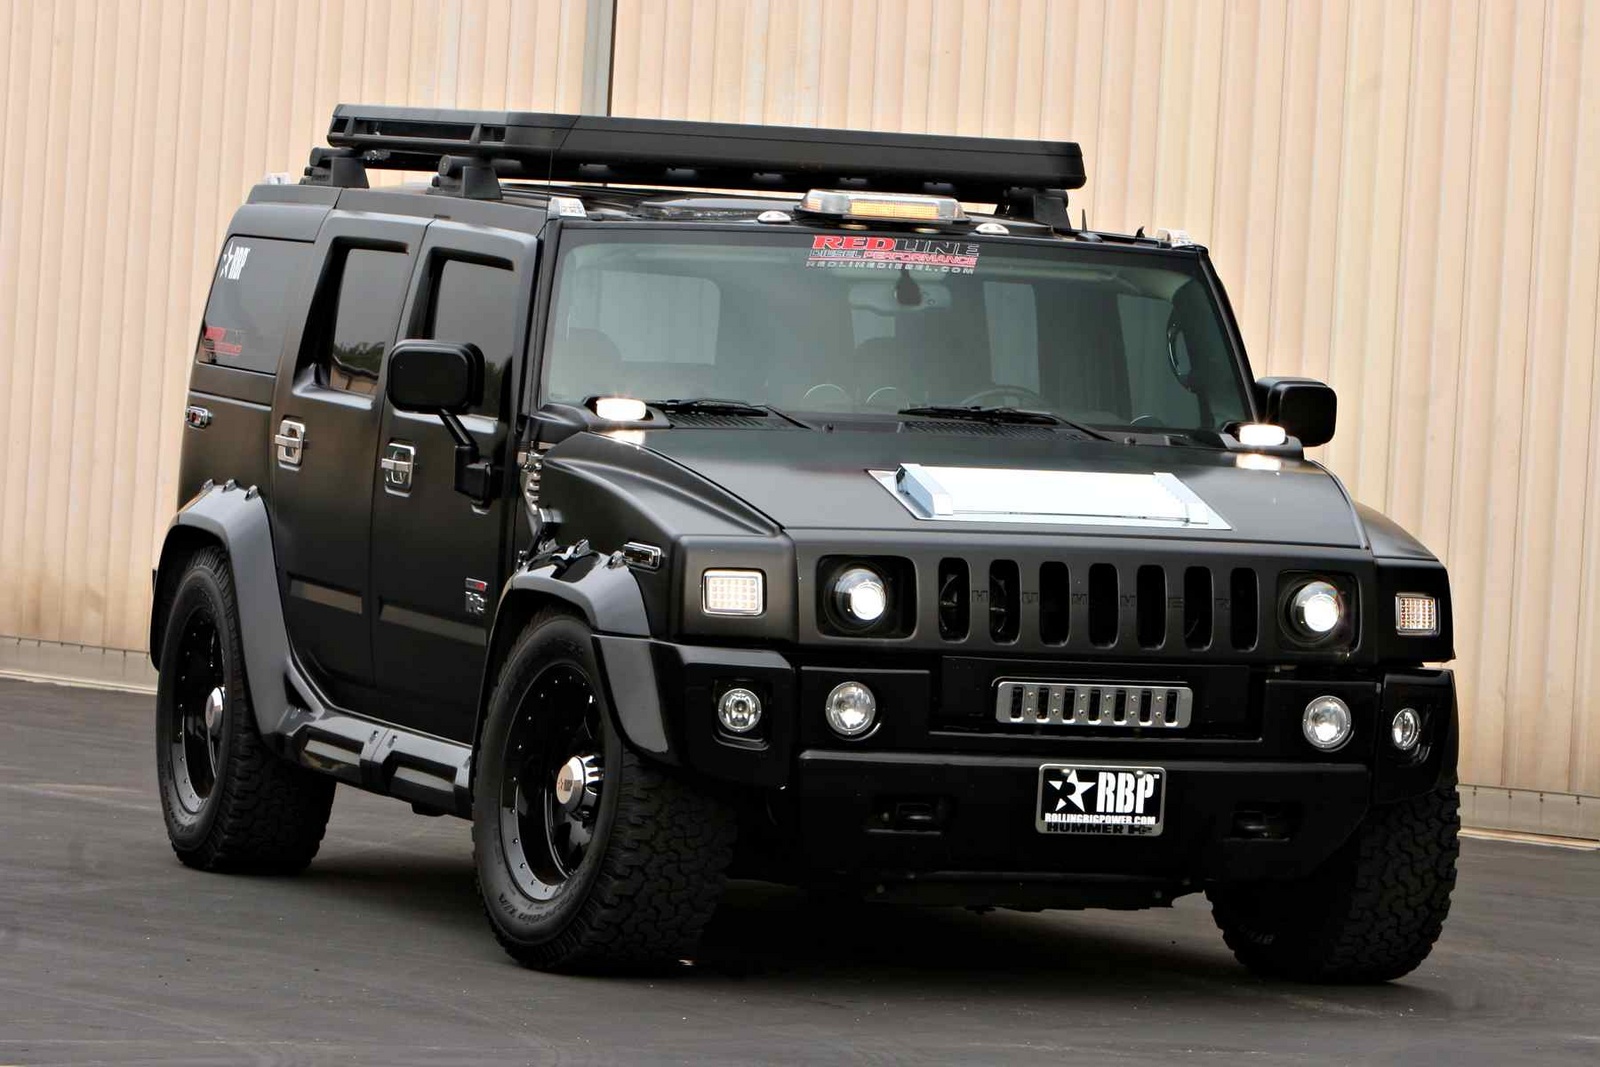 am general hummer related images,1 to 50 - Zuoda Images